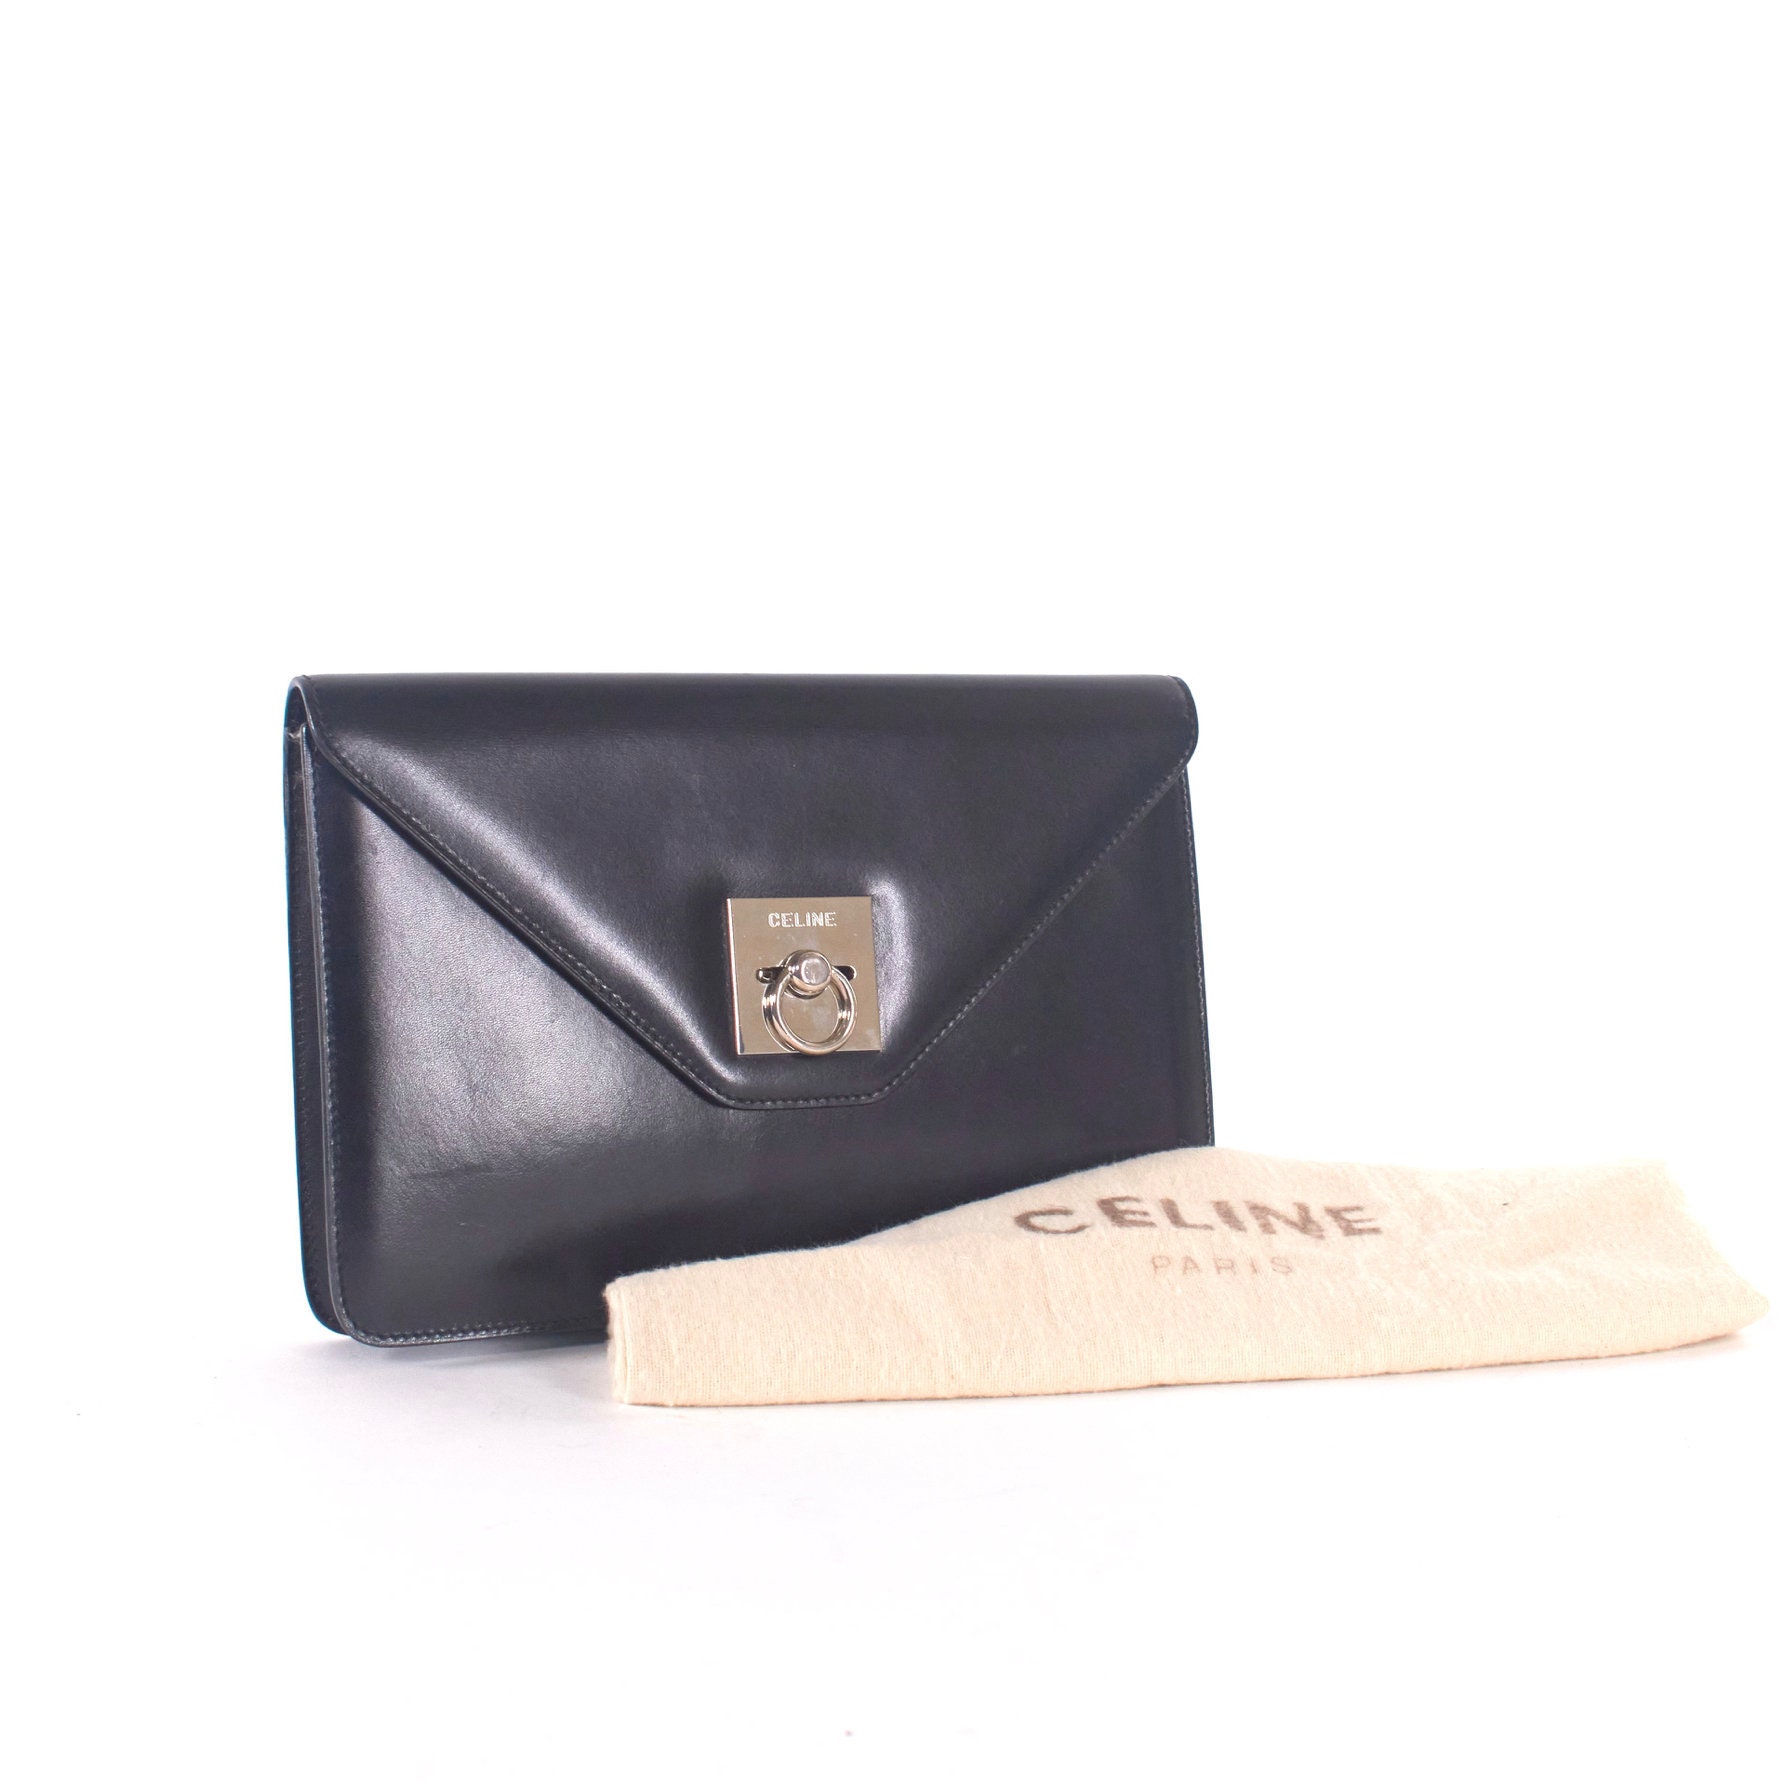  Celine Triomphe 10I65 Tri-Fold Wallet with Coin Holder, Compact  Wallet, Black, Black : Clothing, Shoes & Jewelry